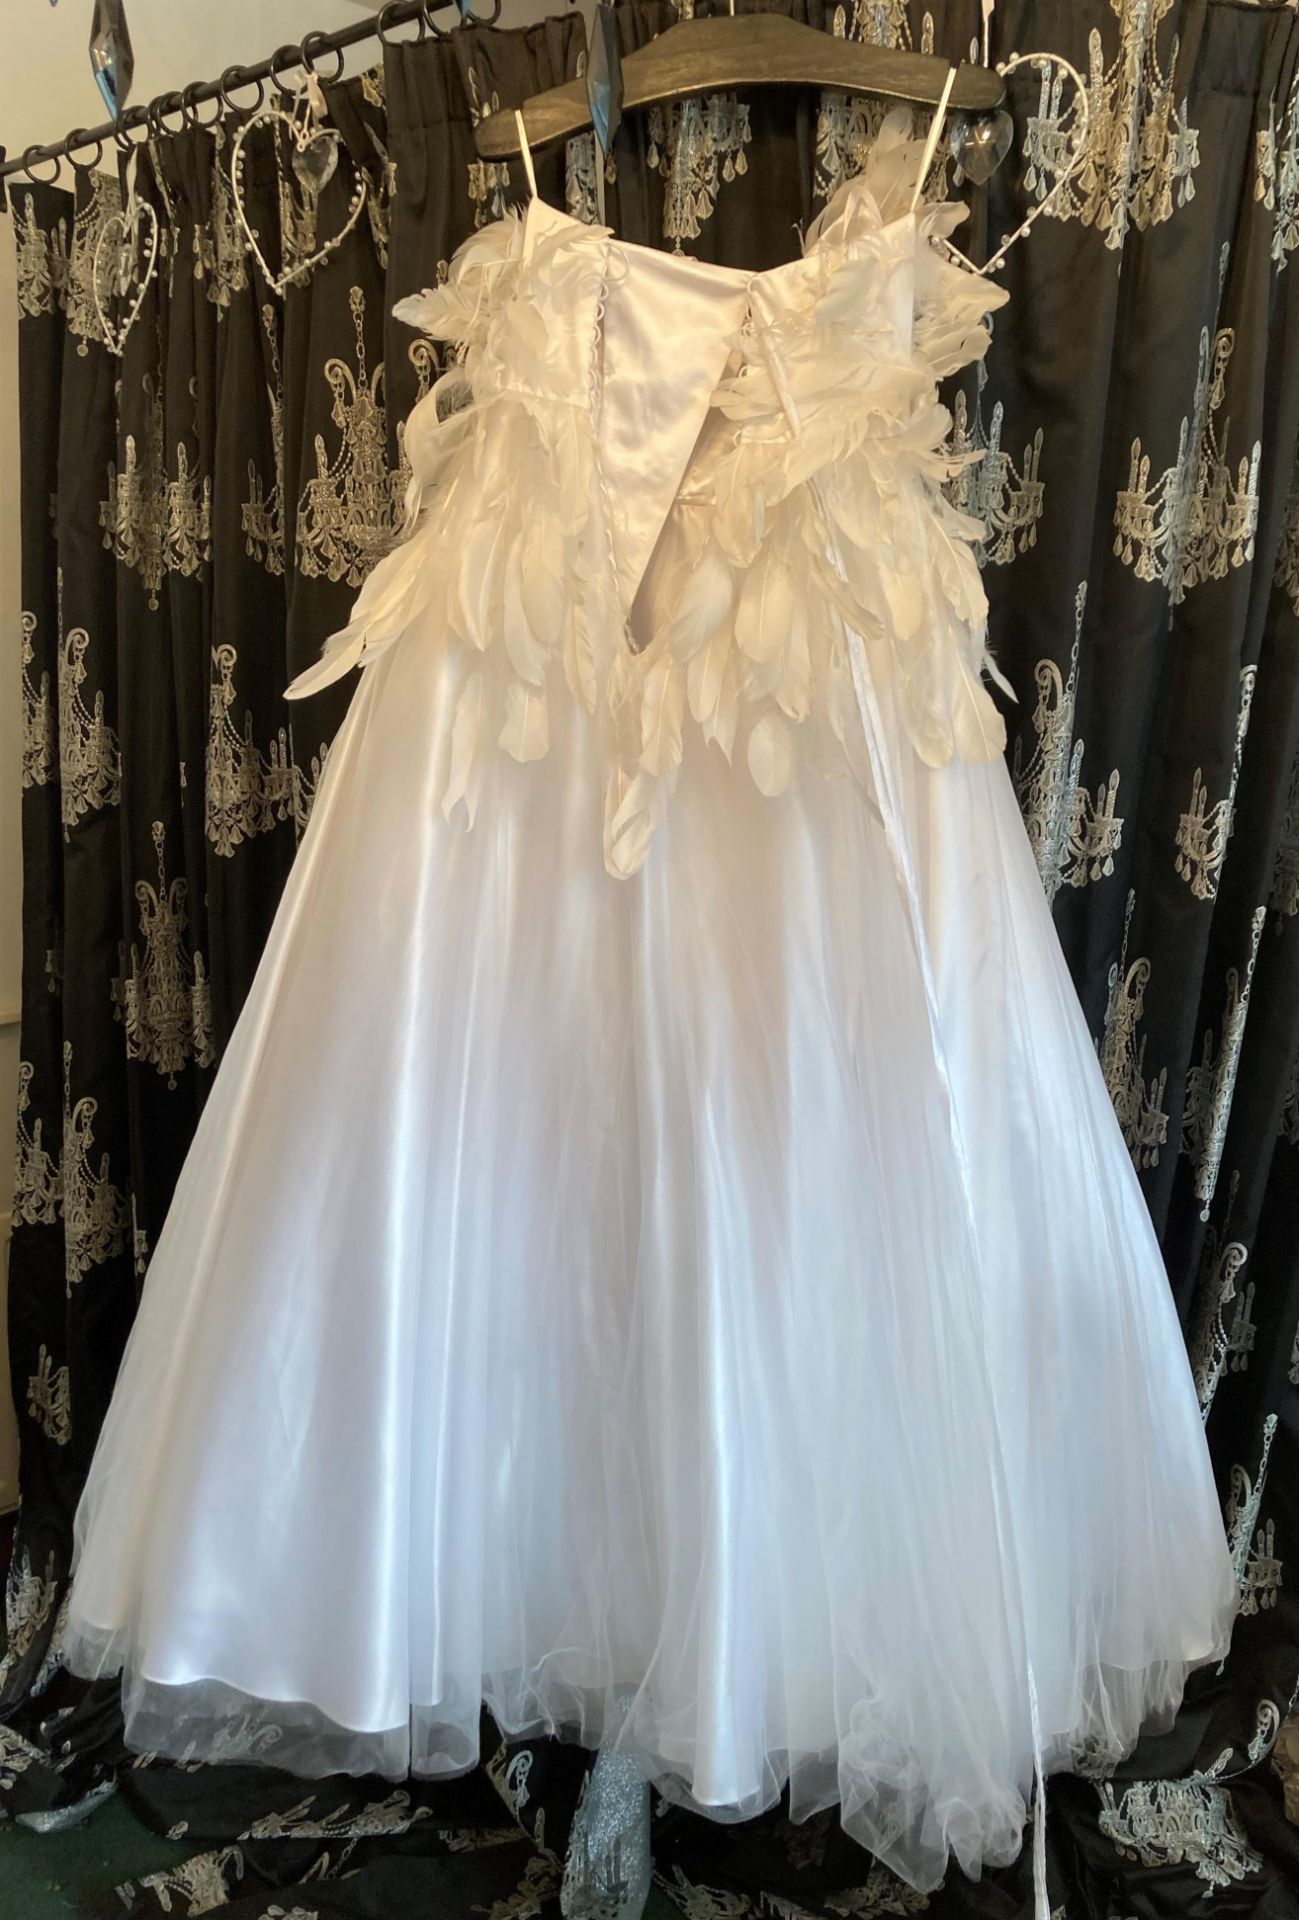 Macduggal feather ball gown, white, size UK 16. - Image 4 of 4